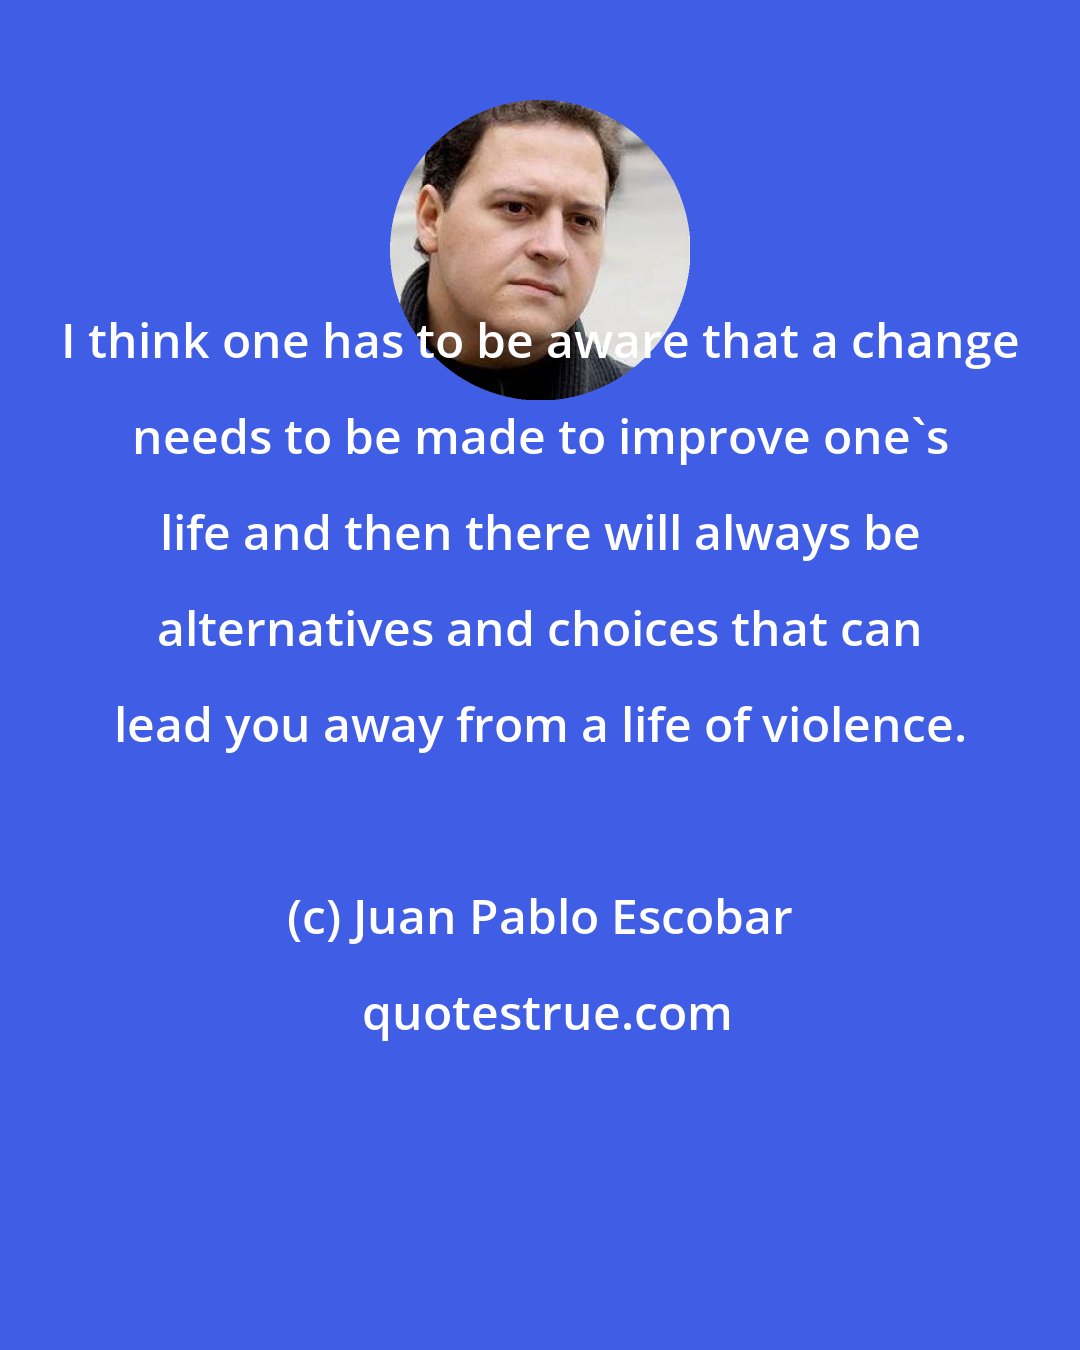 Juan Pablo Escobar: I think one has to be aware that a change needs to be made to improve one's life and then there will always be alternatives and choices that can lead you away from a life of violence.